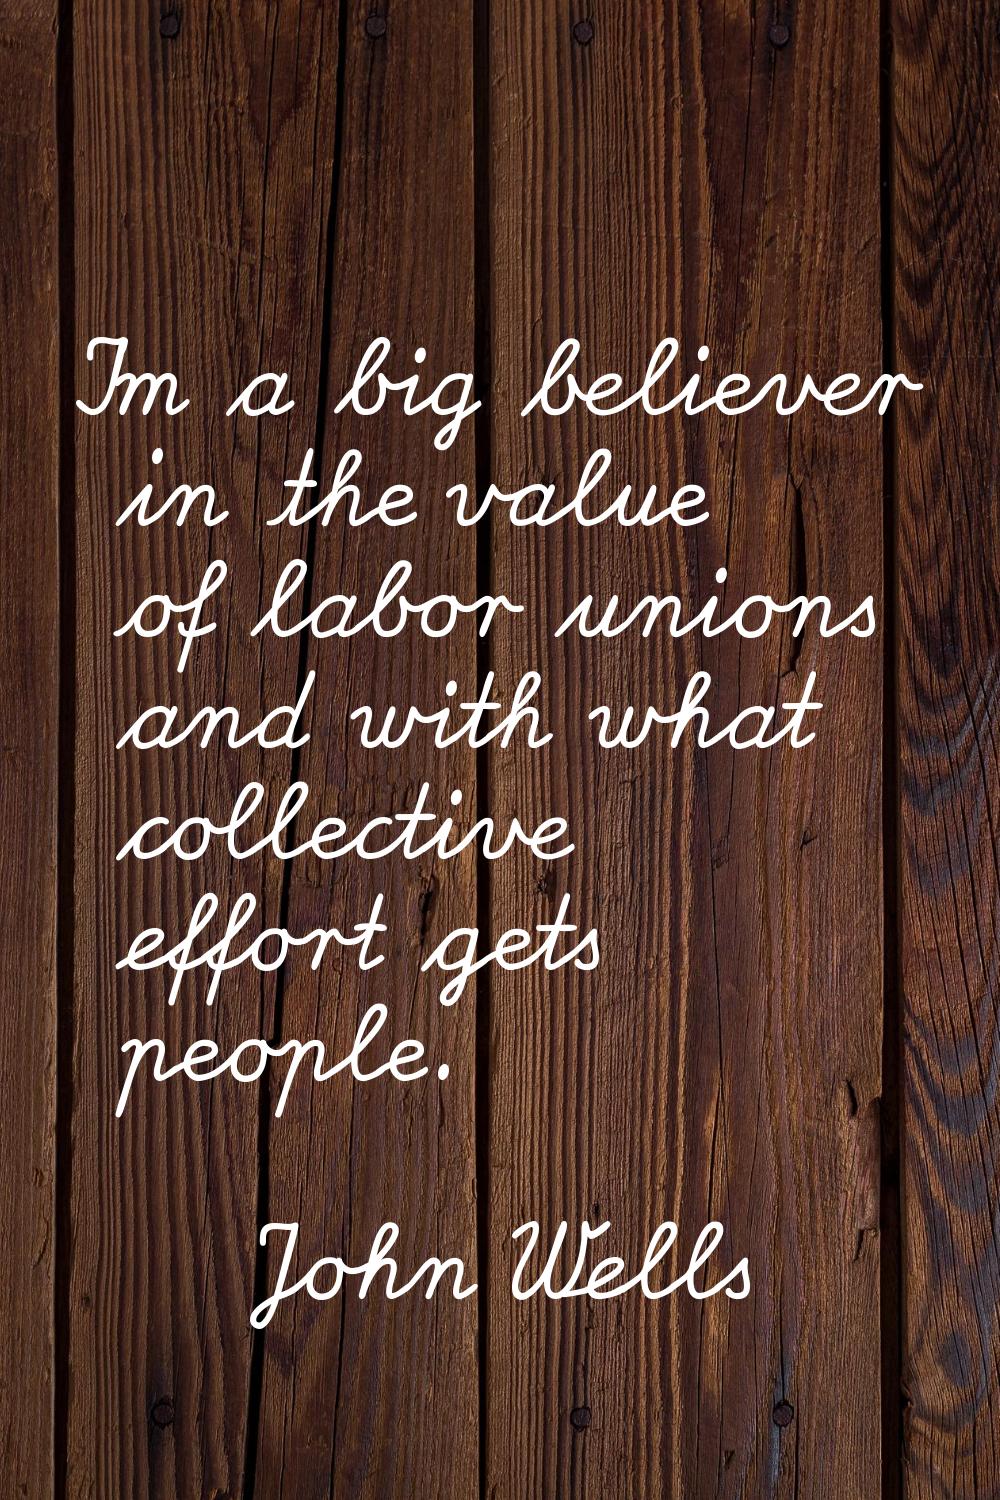 I'm a big believer in the value of labor unions and with what collective effort gets people.